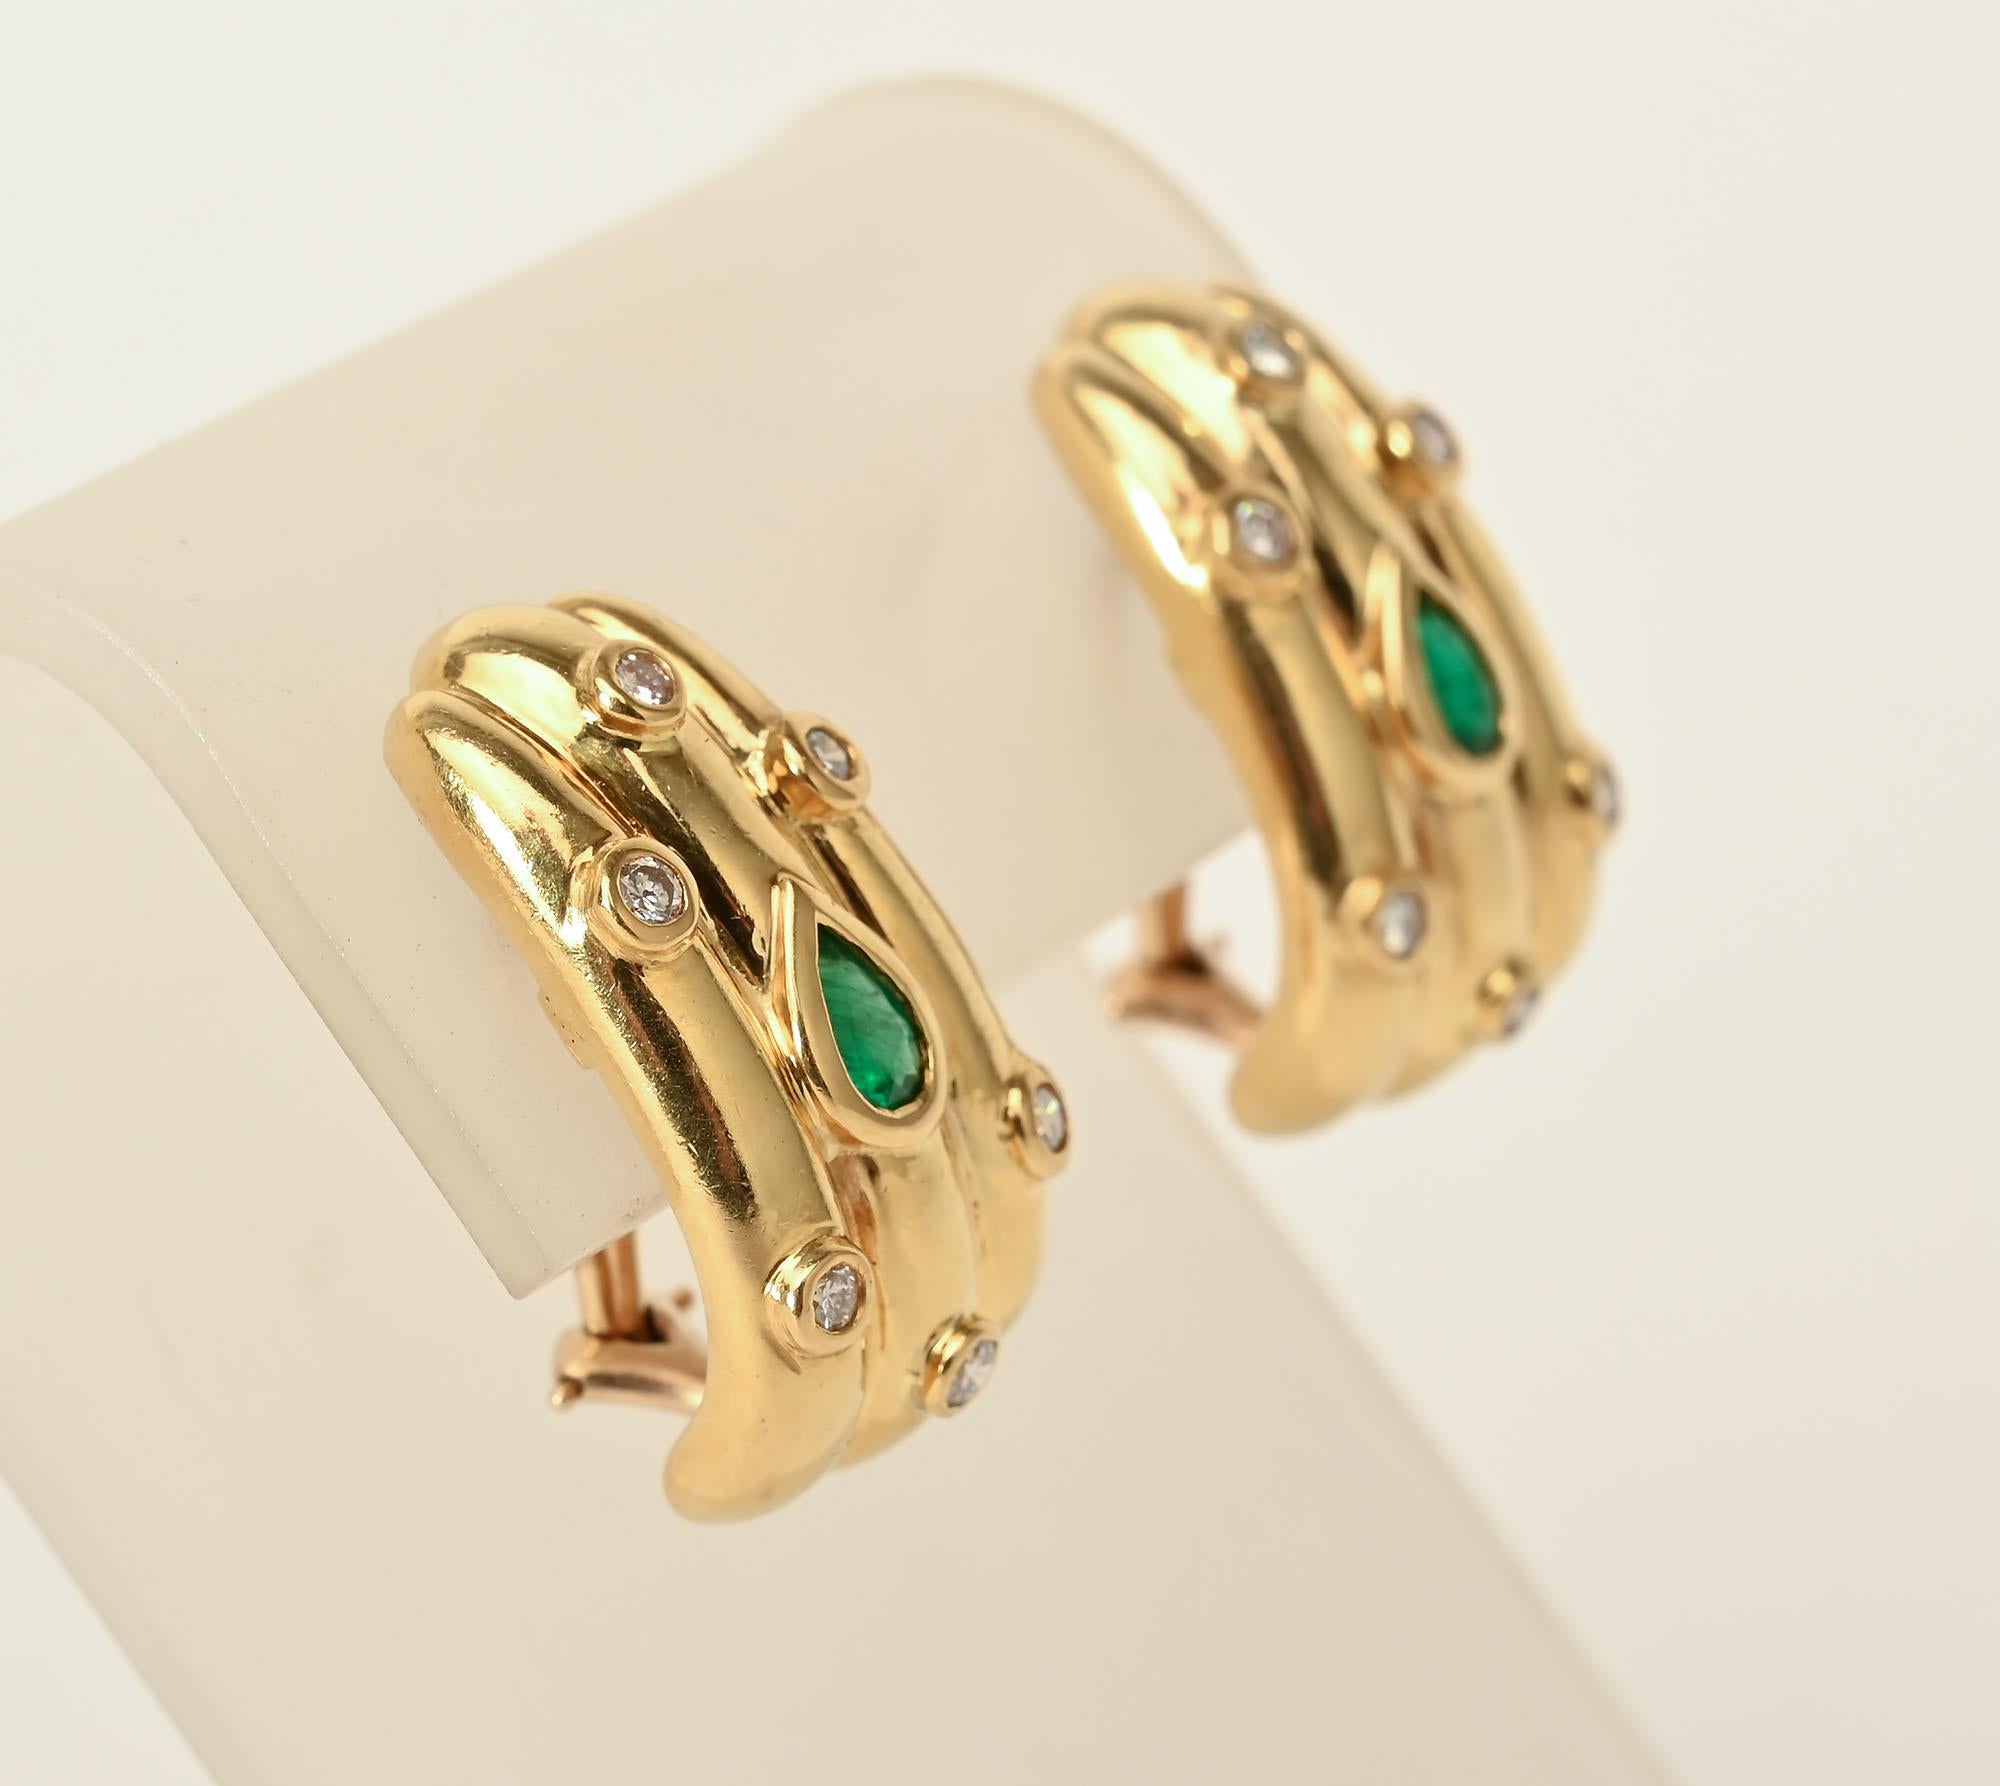 Substantial size 18 karat gold earrings with three ribs centered with a pear shaped emerald and surrounded by 6 round diamonds. Omega backs. Maker's mark JDI.